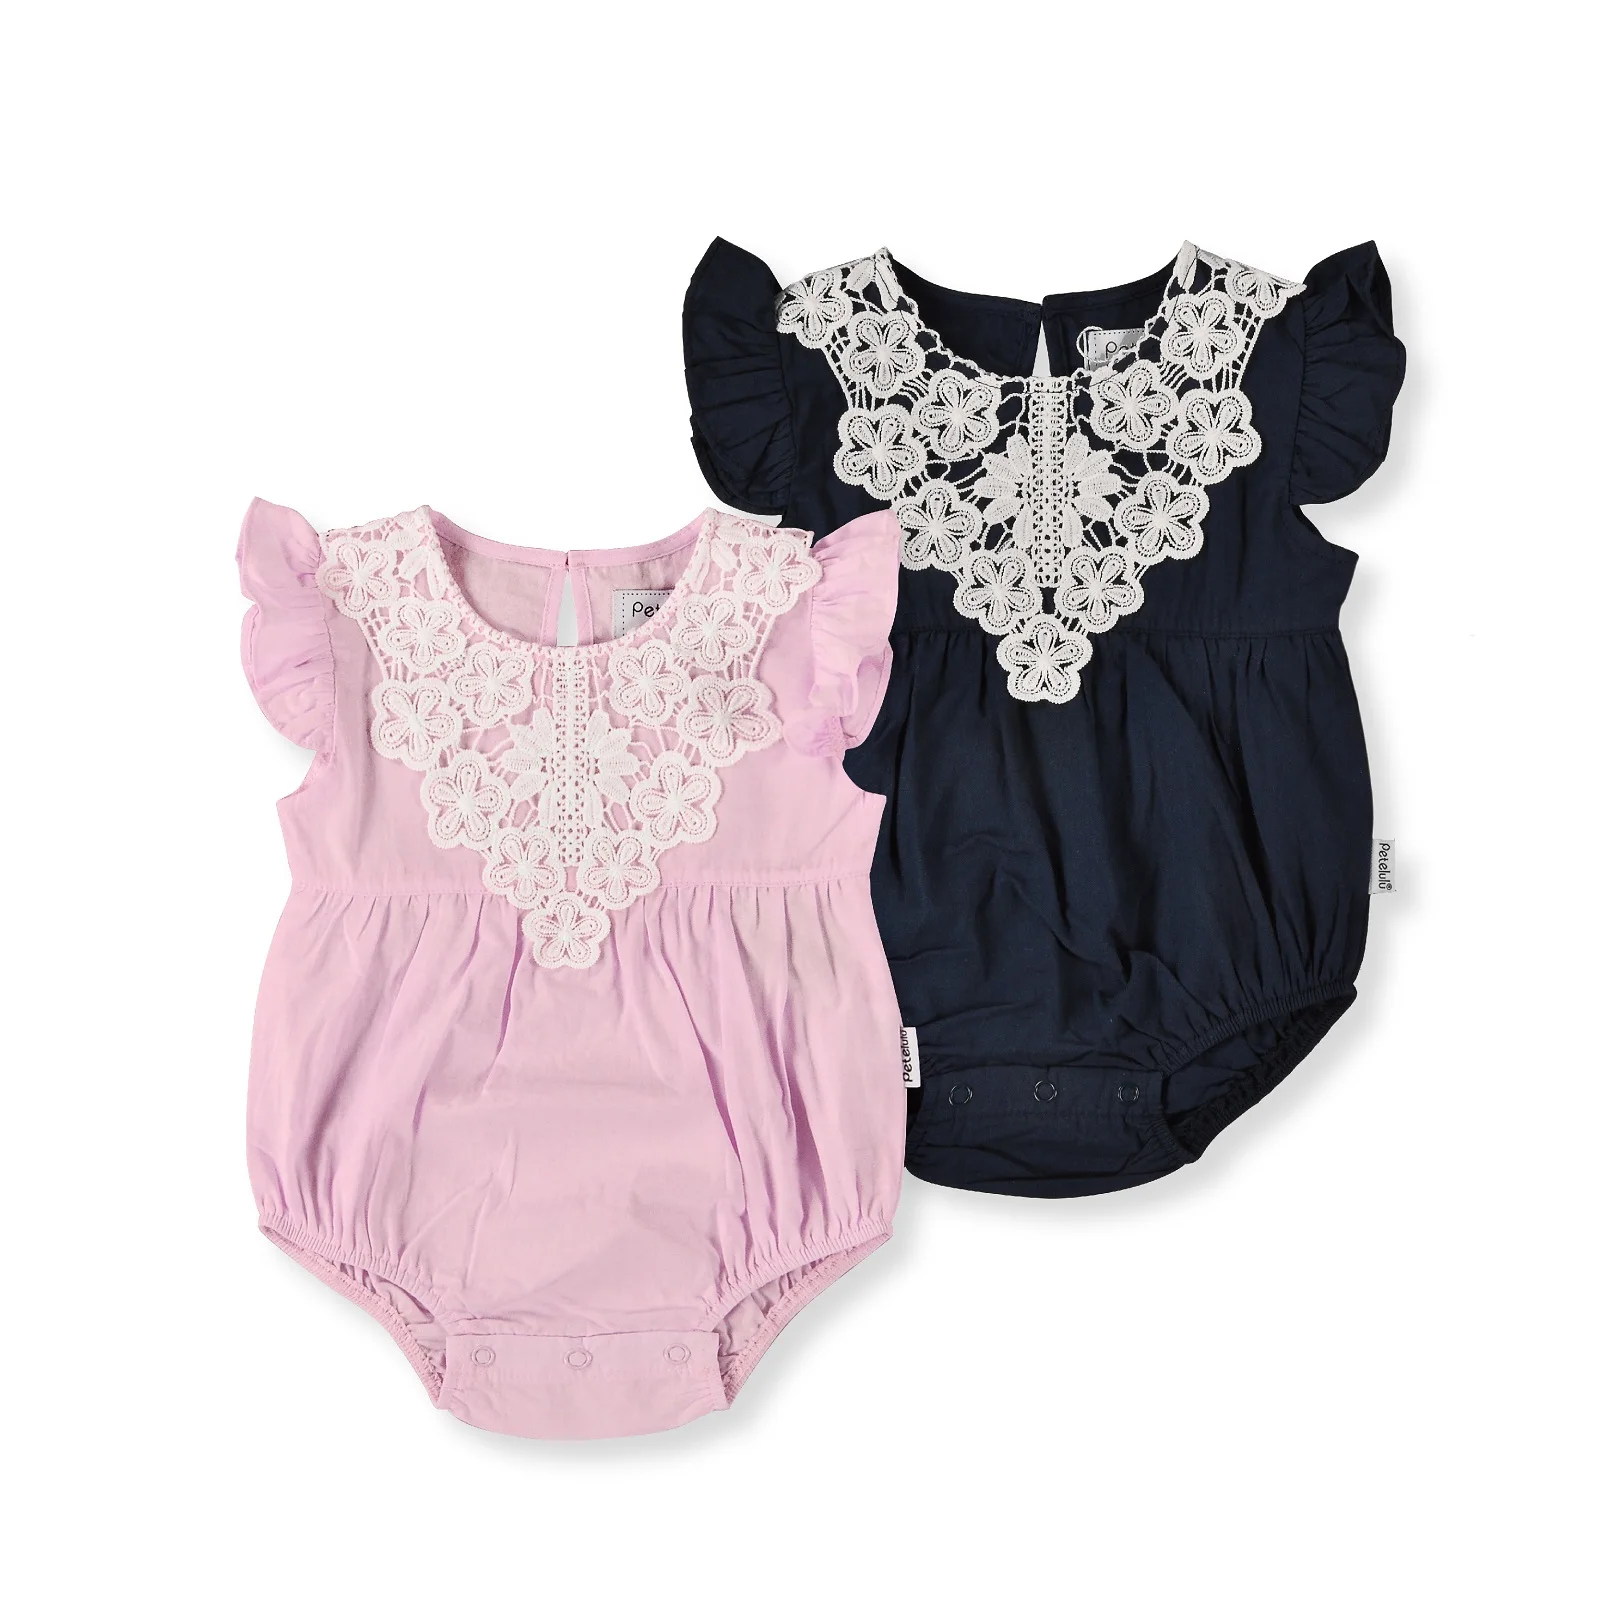 

100% Organic Cotton Material and Infants & Toddlers baby girls clothes